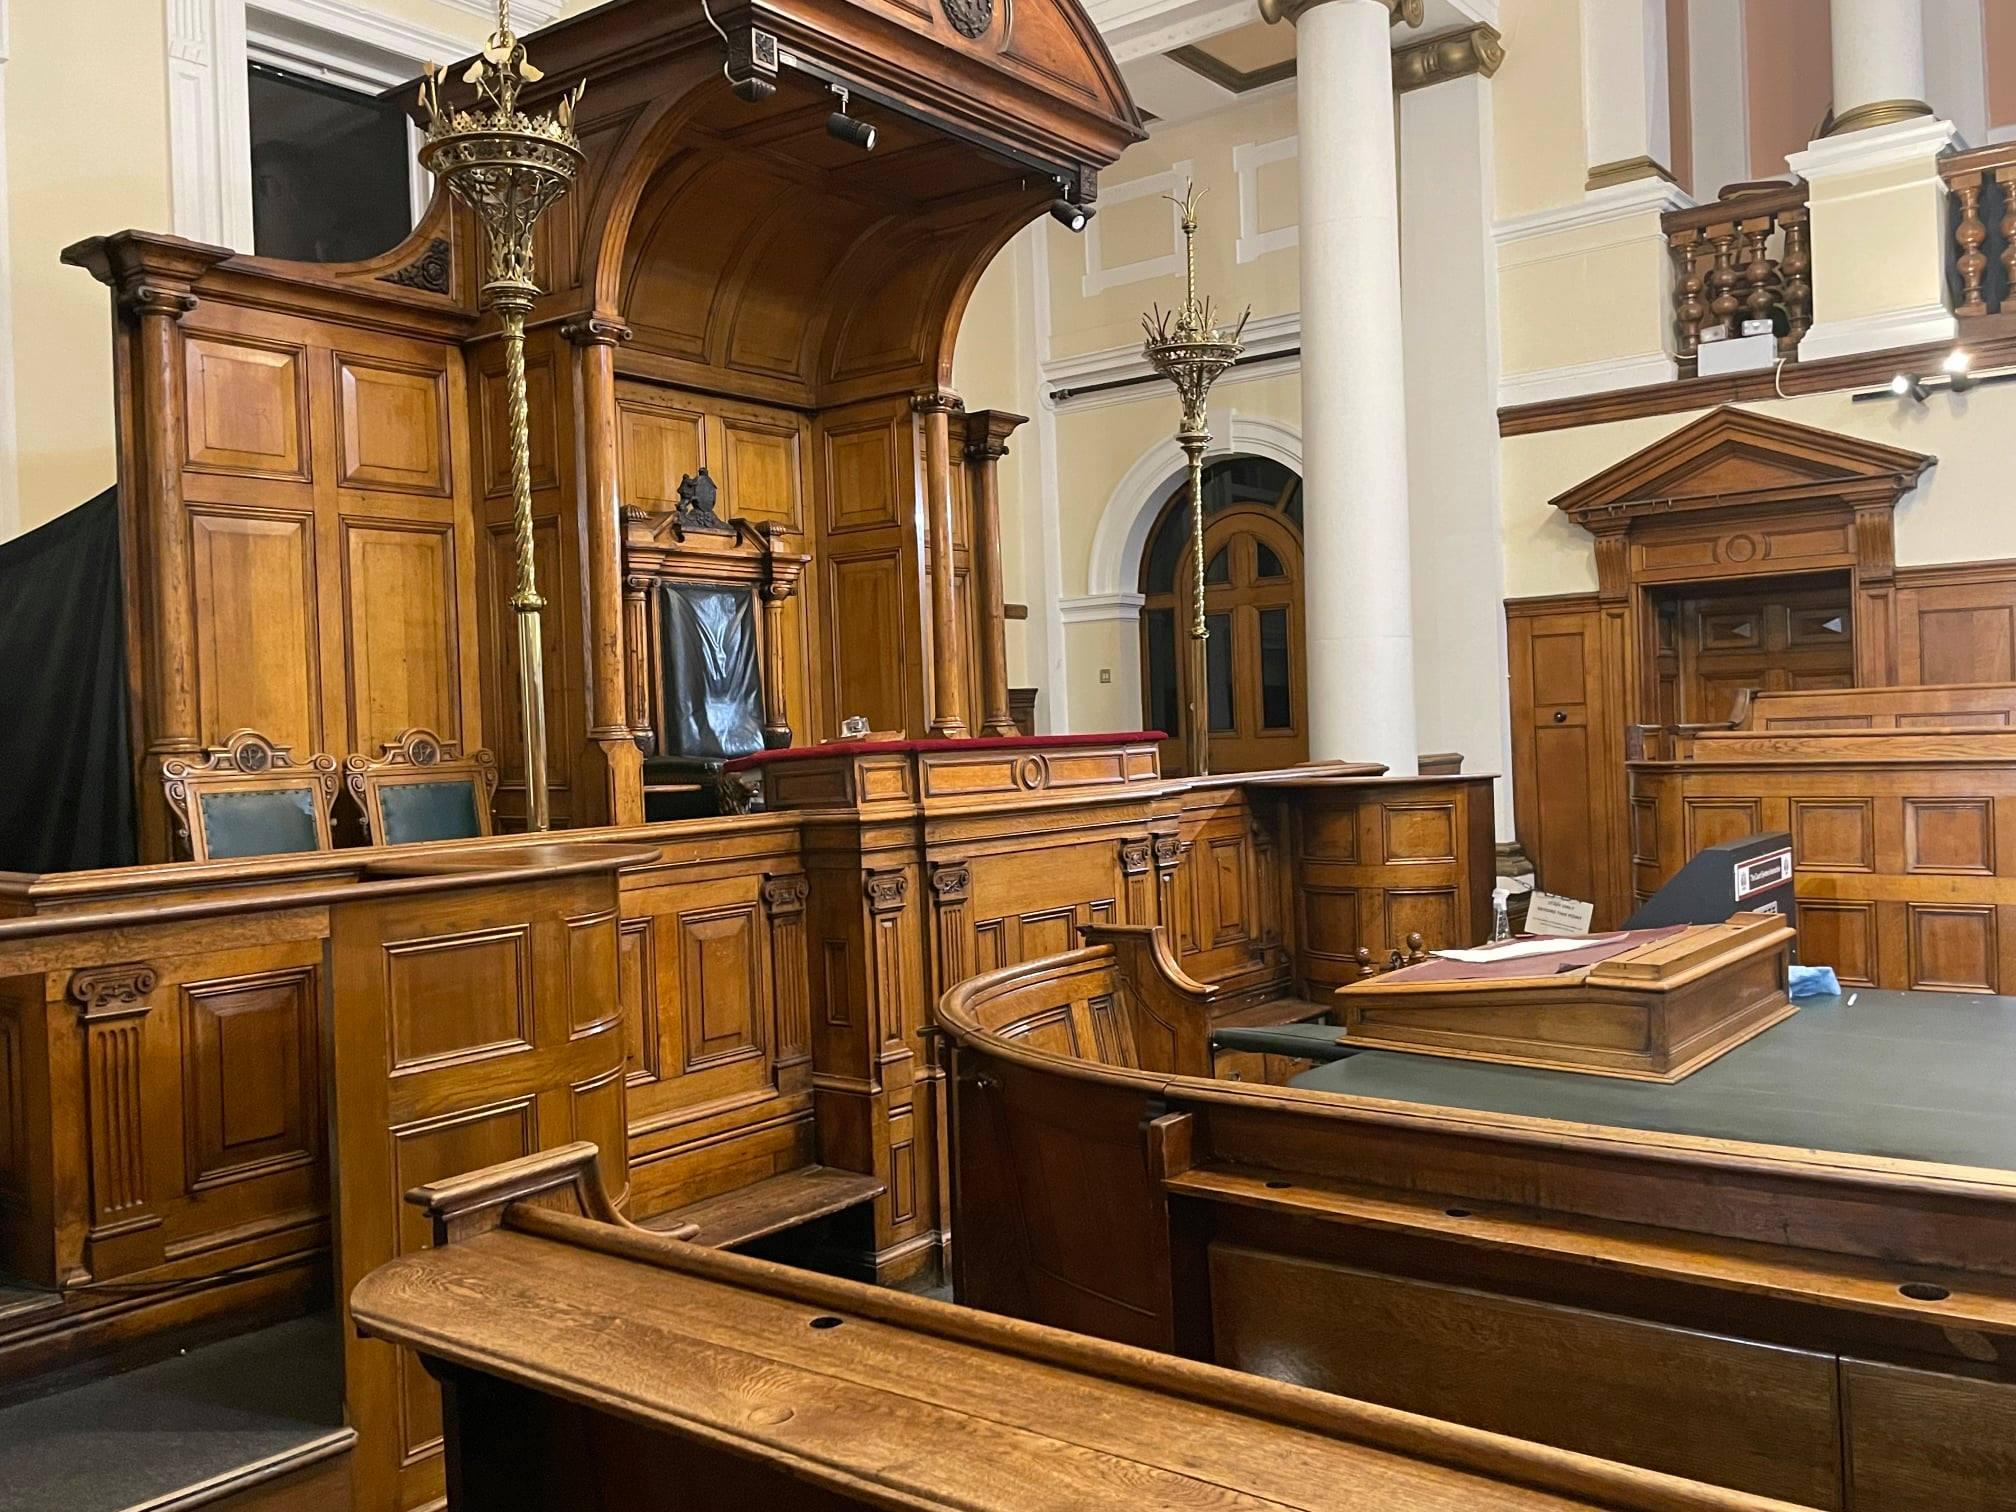 Nottingham’s historic courtroom hosts an investigation into evidence for typical Tudor clothing